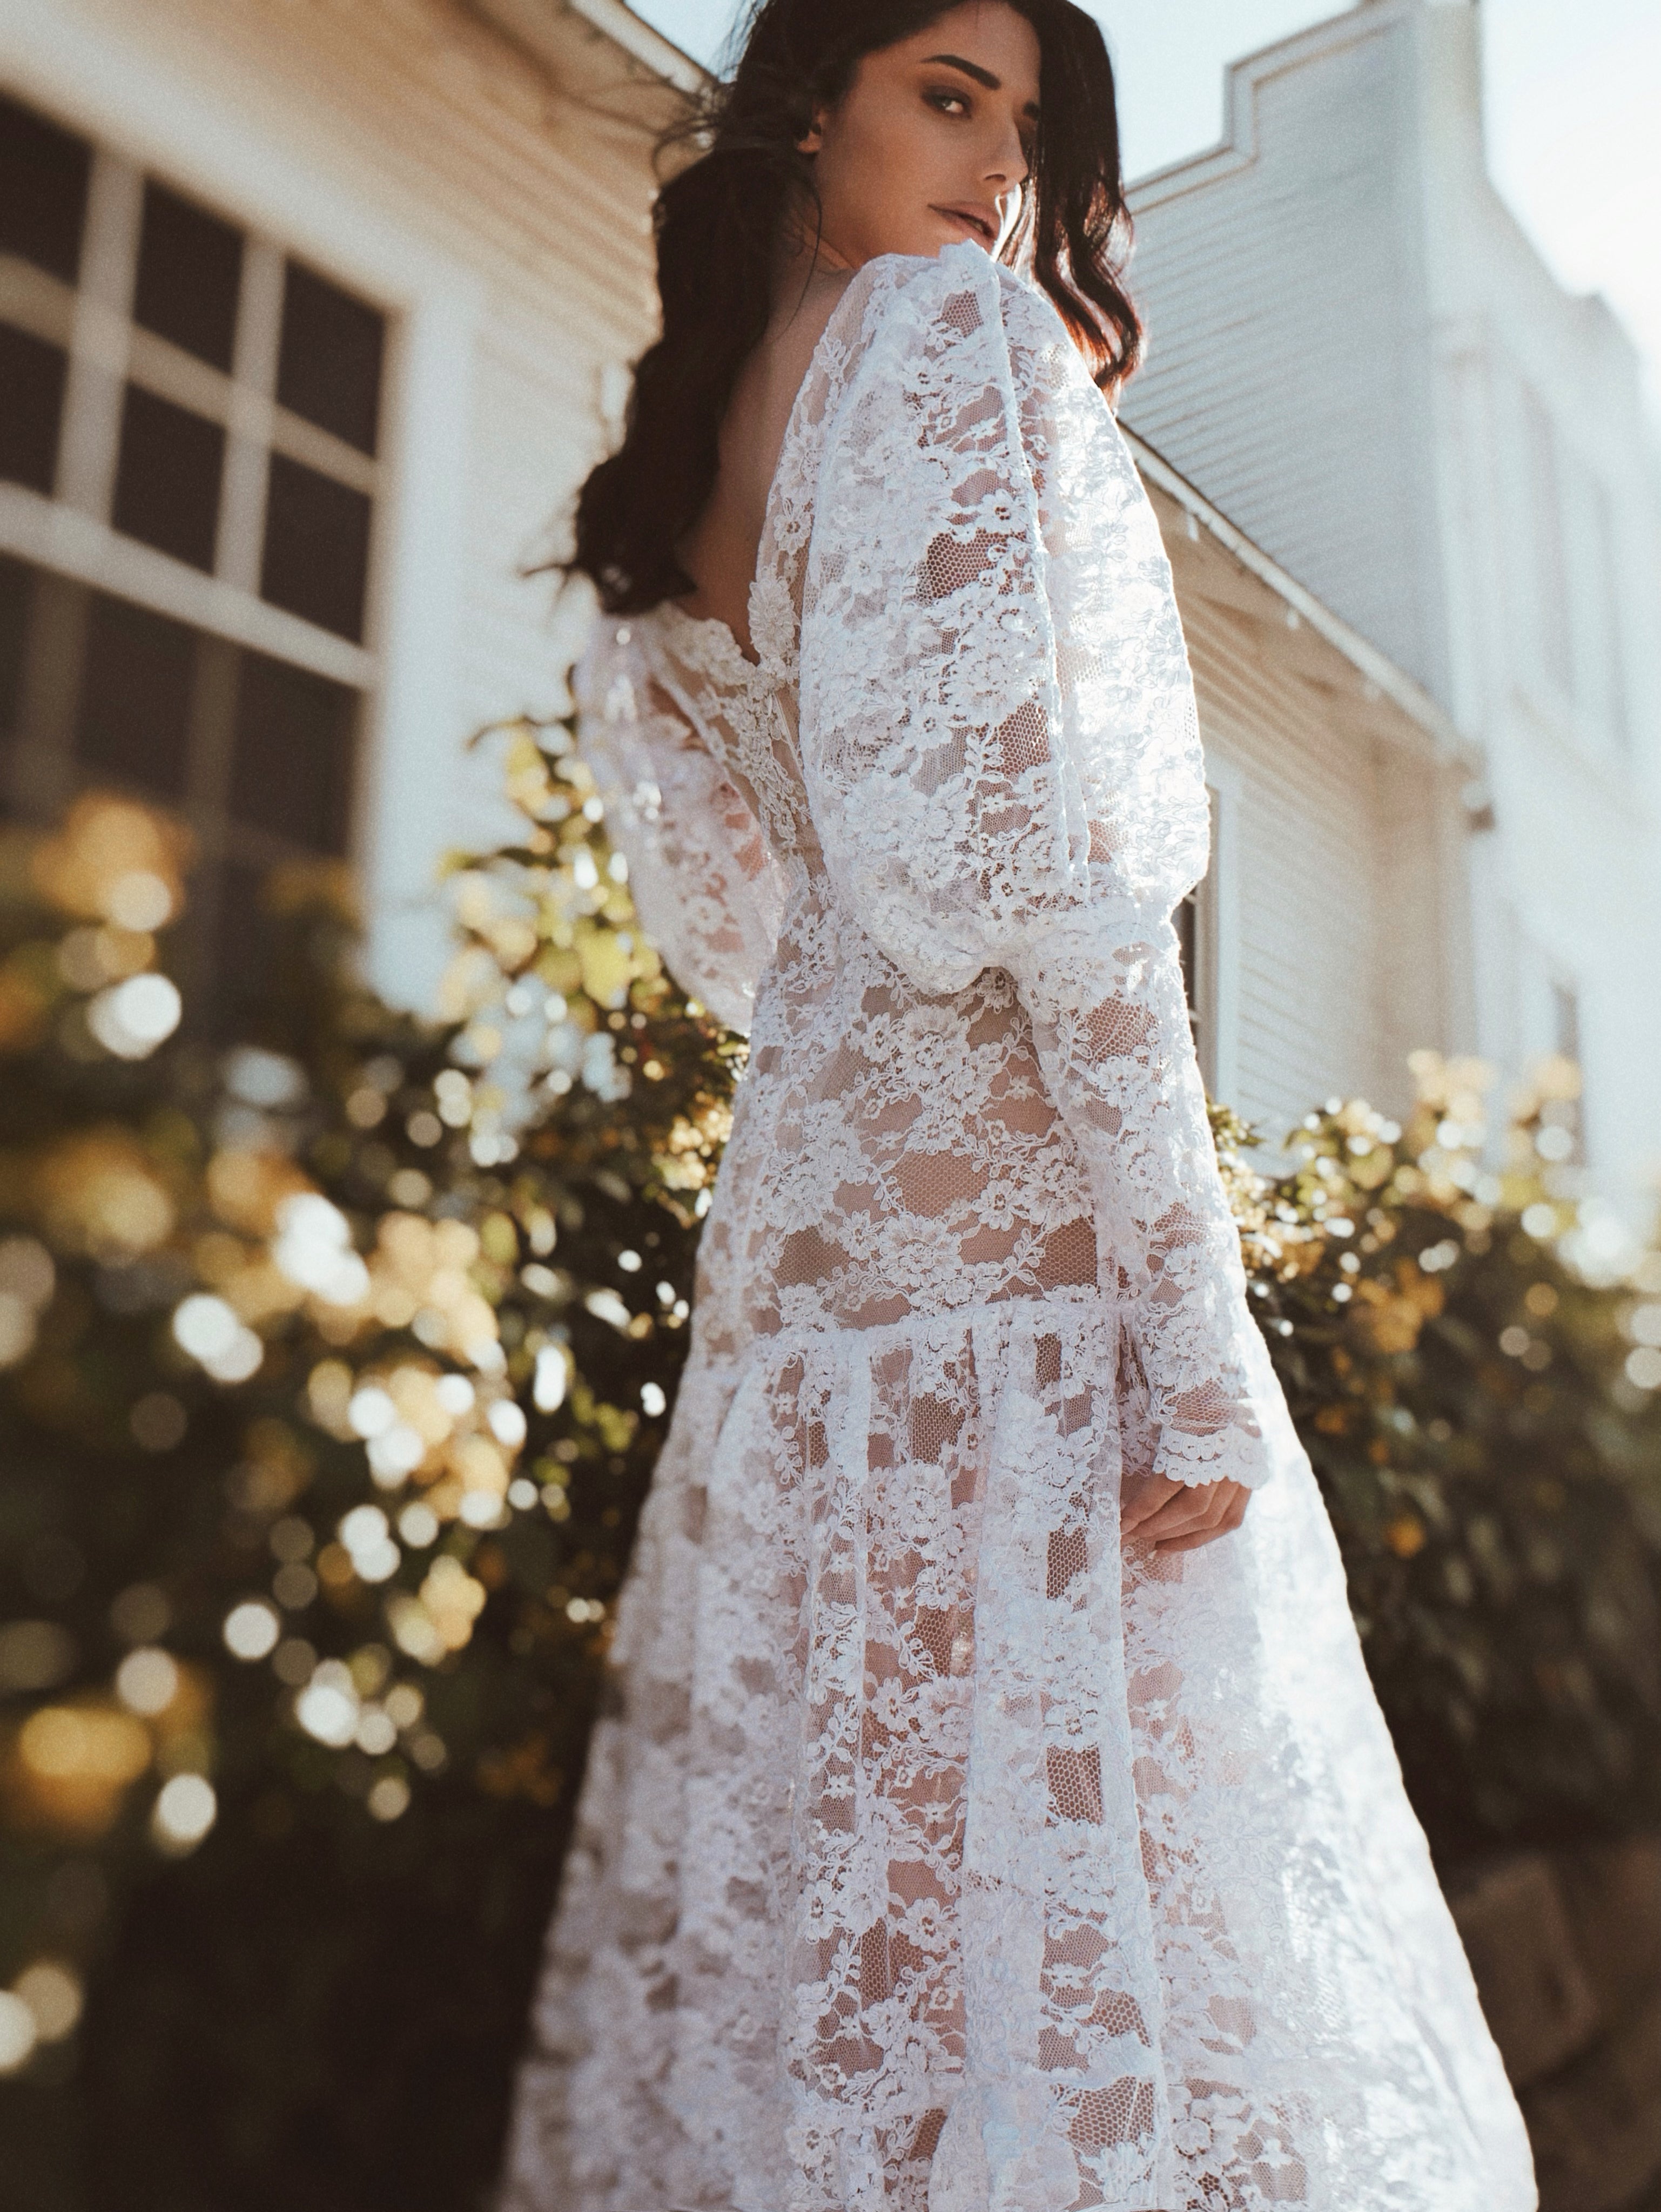 A model poses in a victorian style gigot sleeve wedding dress by Lauren Elaine Los Angeles.